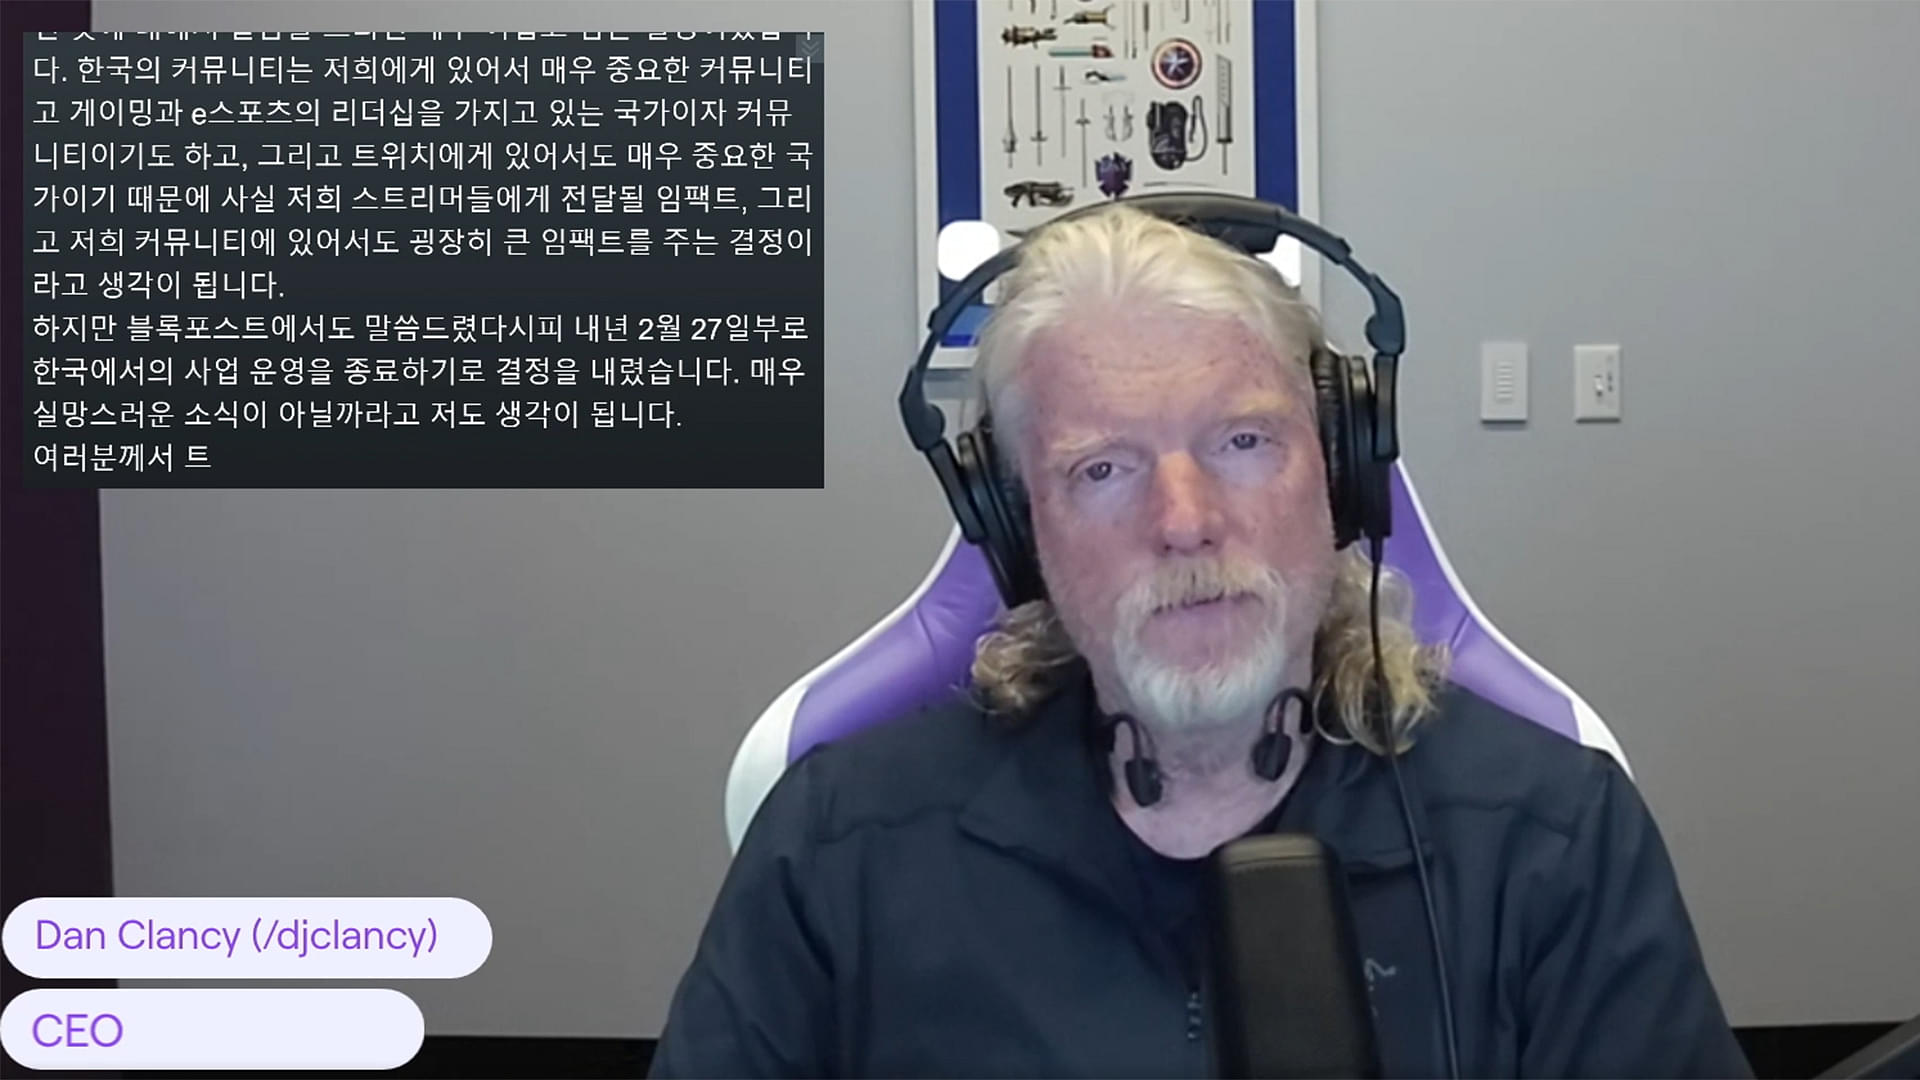 Twitch CEO Dan Clancy announces shutting down the service in South Korea